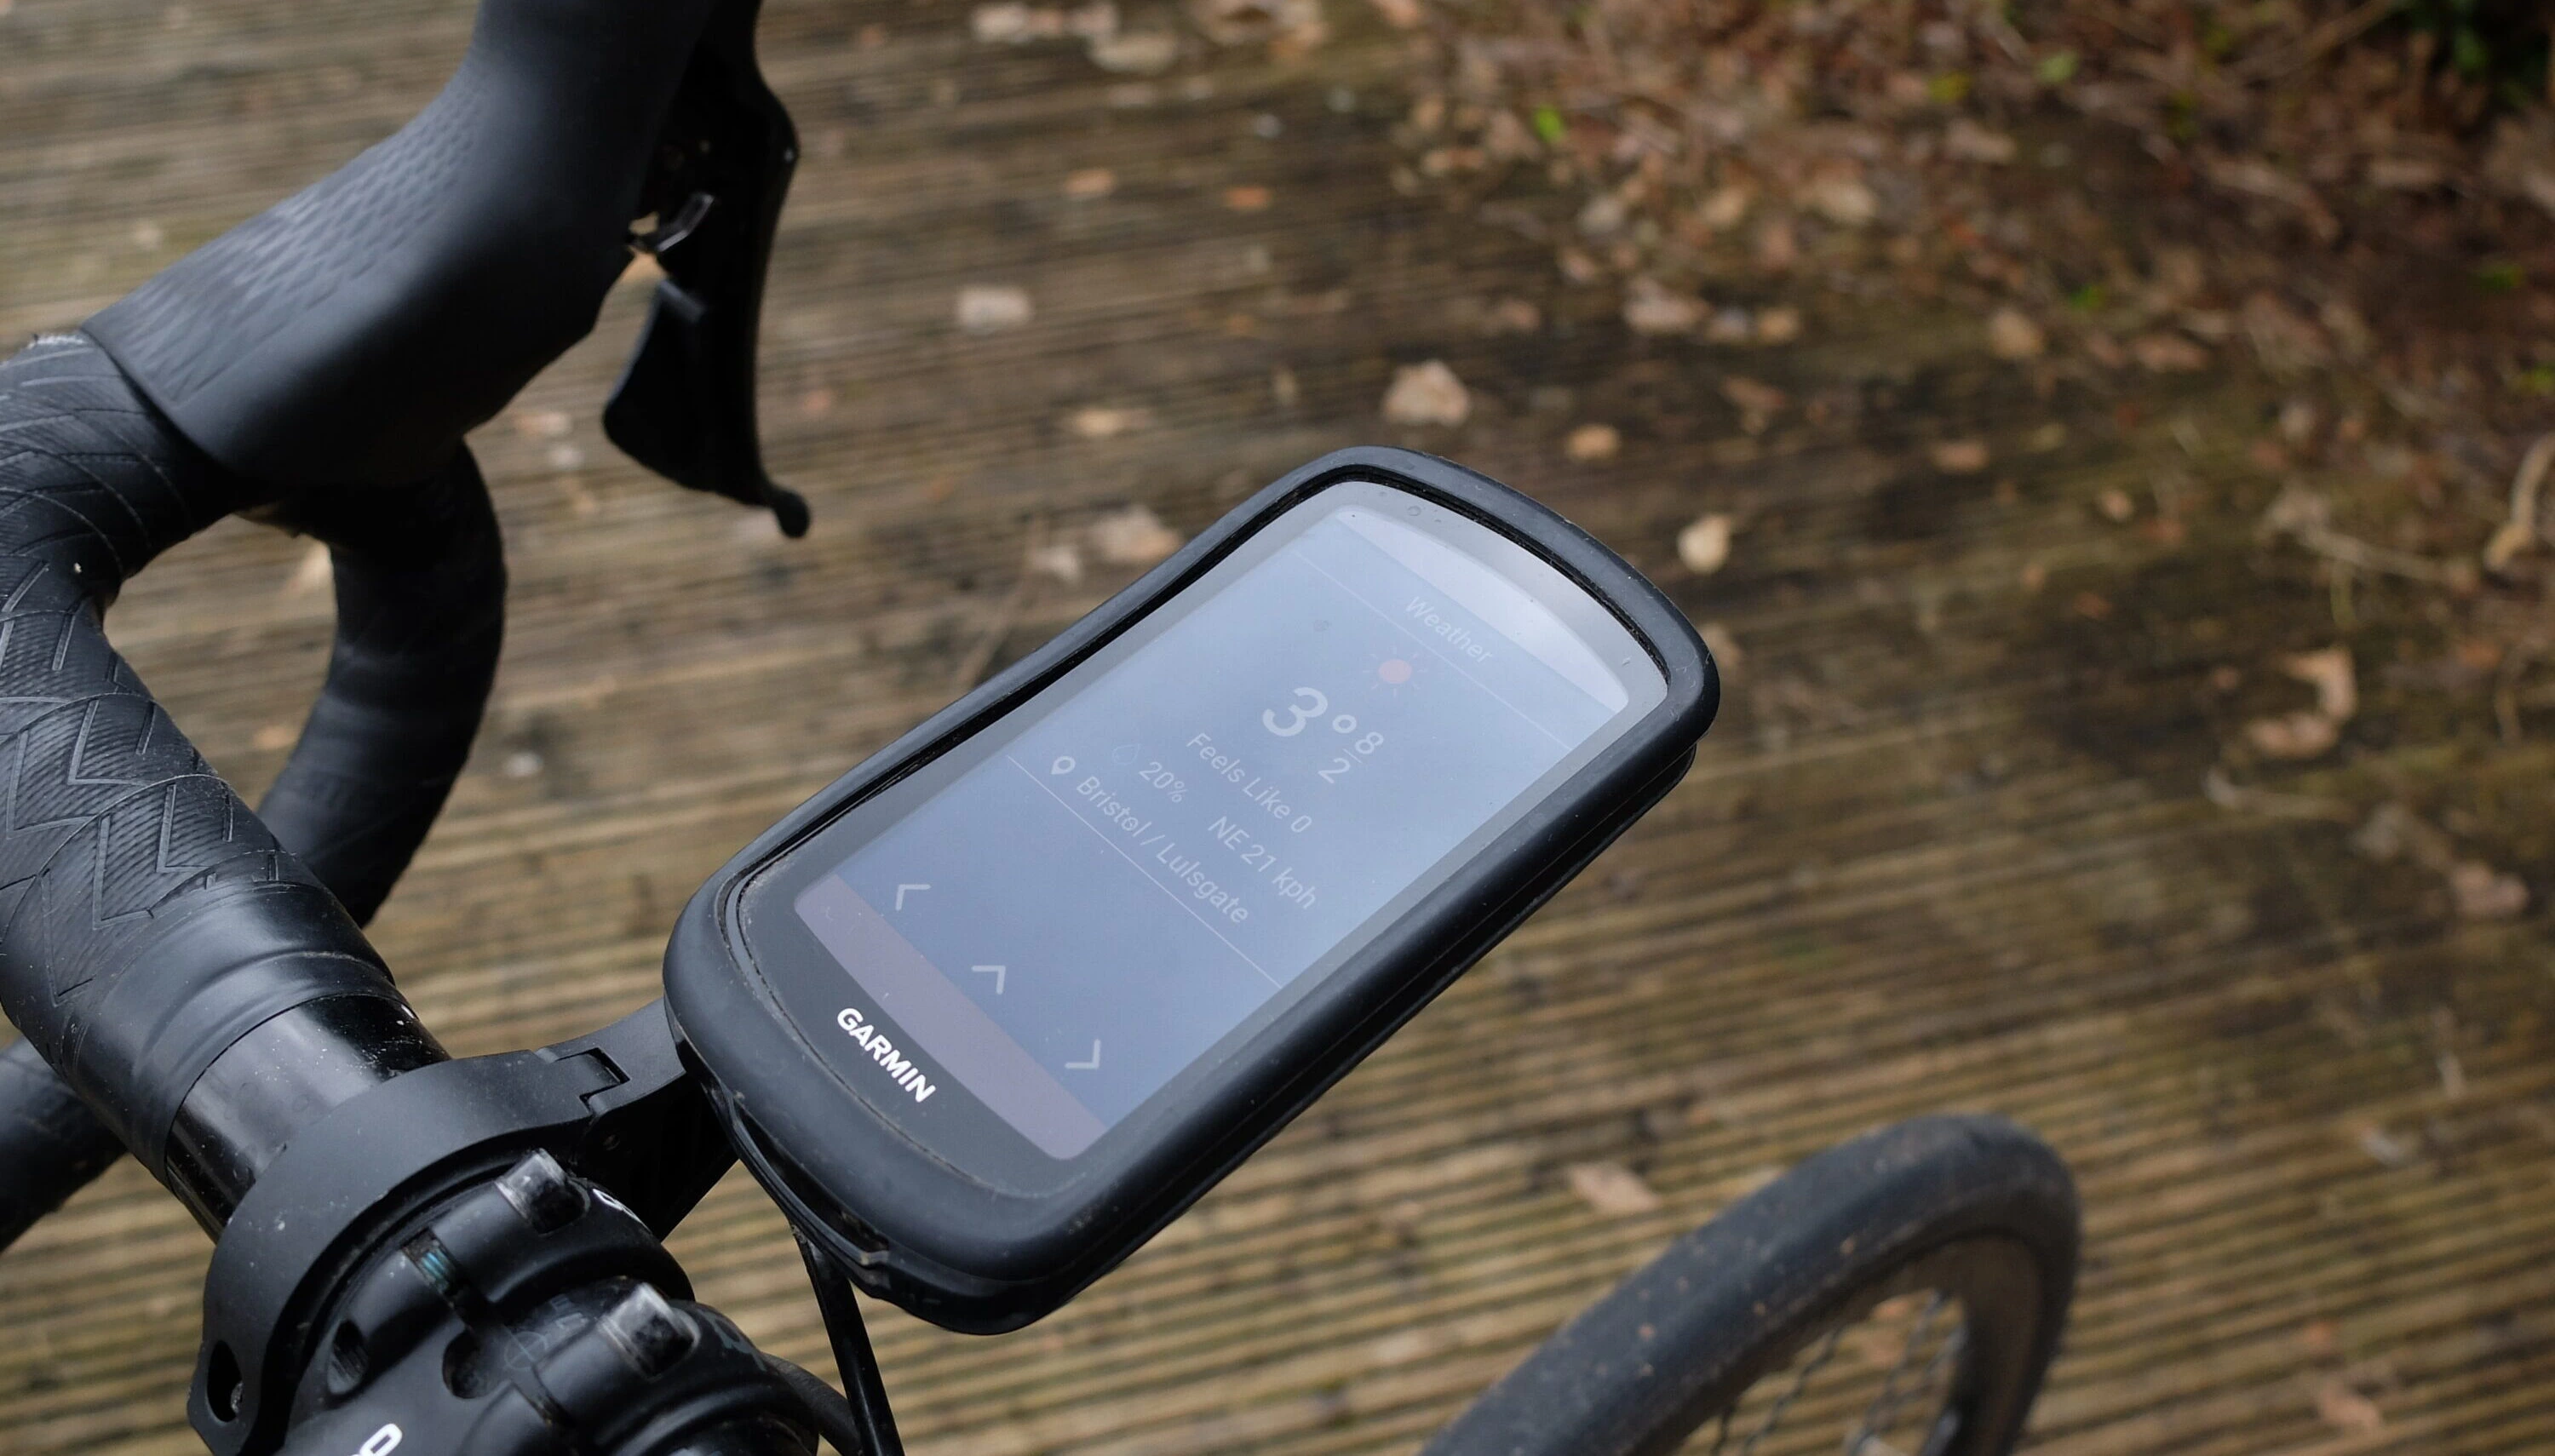 Solar powered, long running and most accurate Garmin Edge 1040